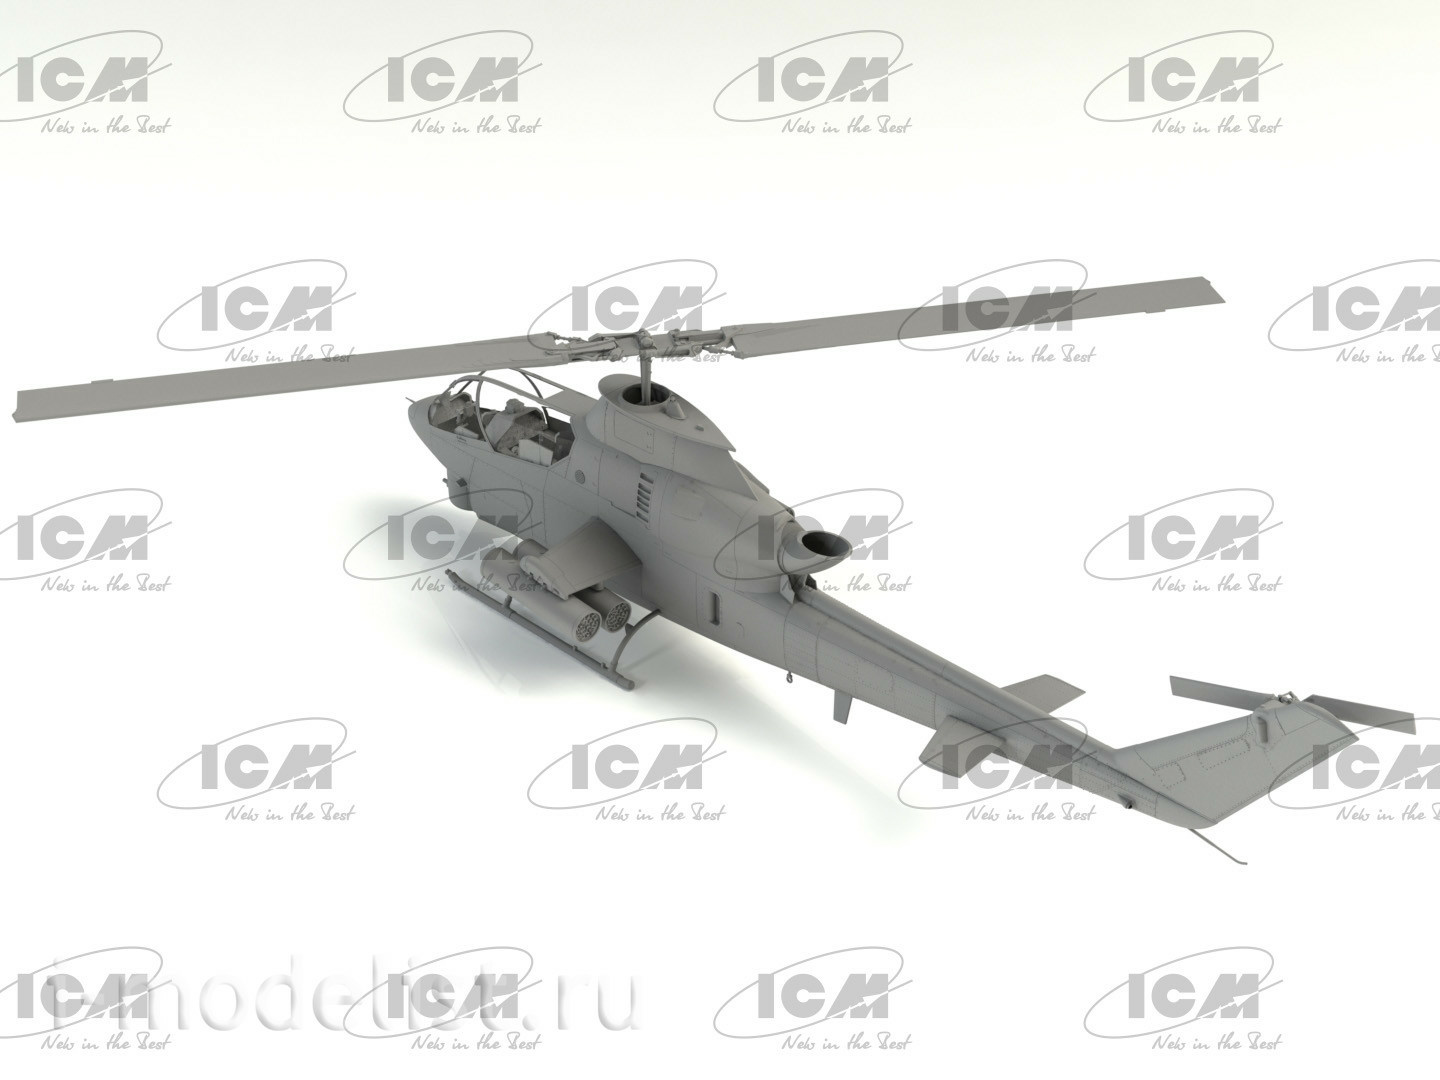 32061 ICM 1/32 American AH-1G Cobra Attack Helicopter (late production)